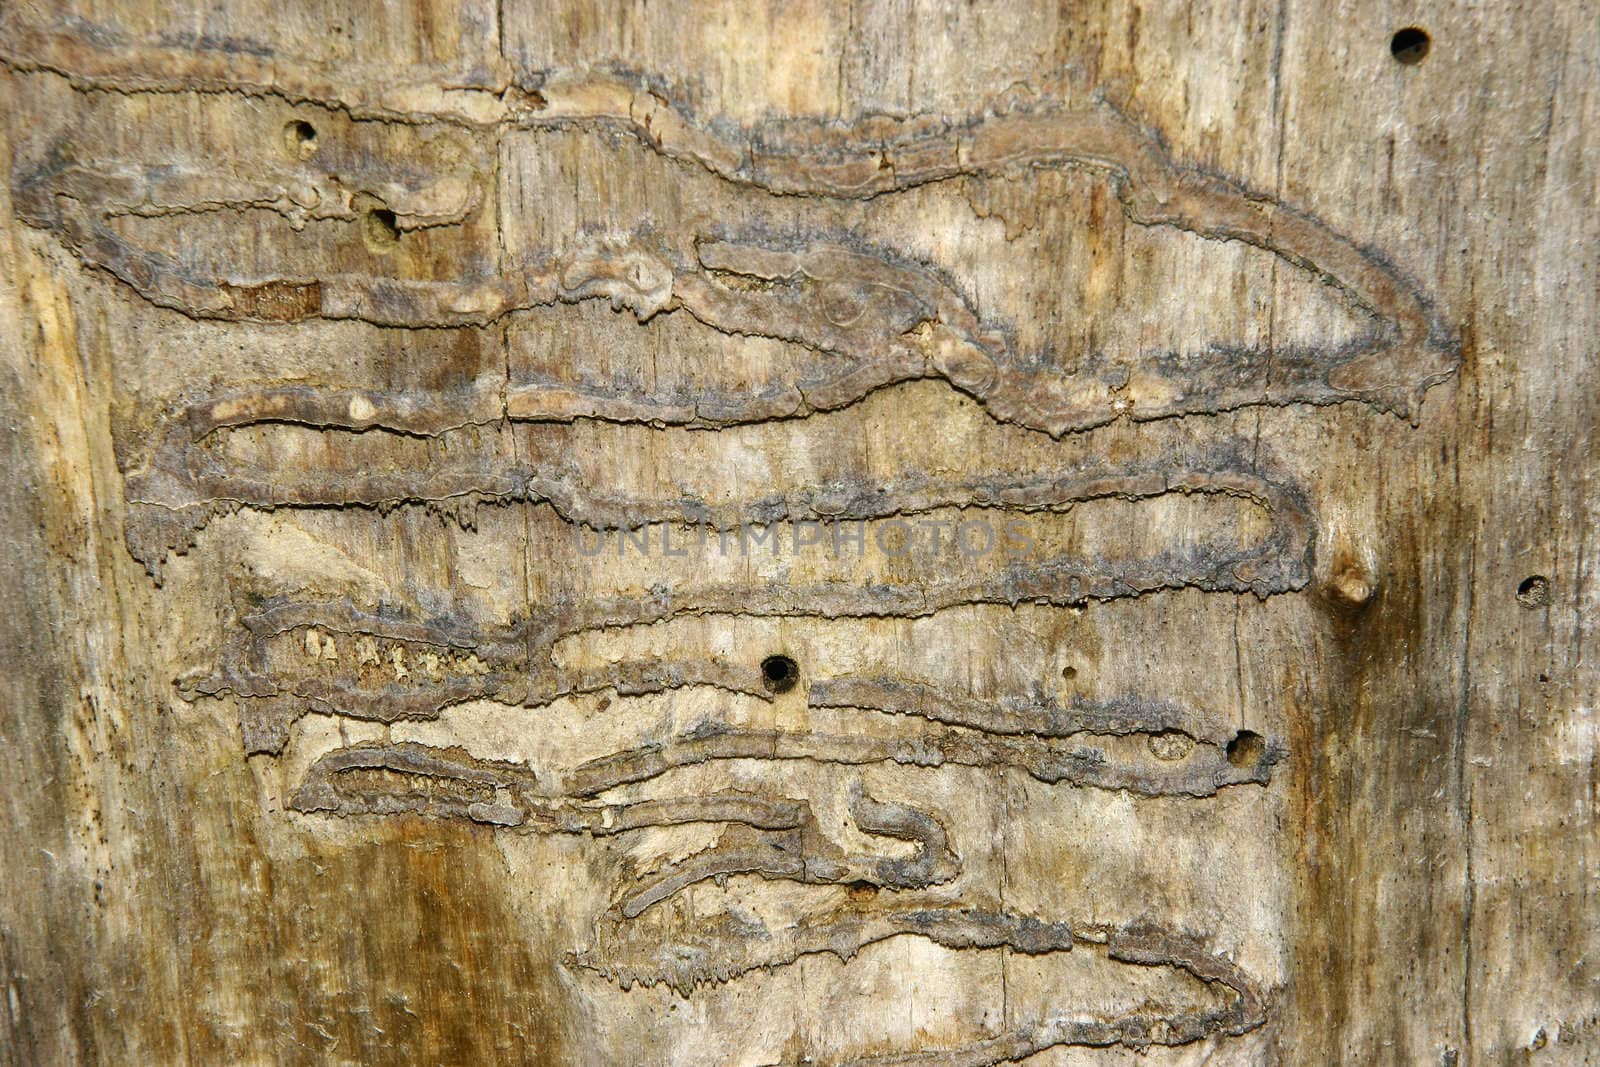 Dead wood with worm holes